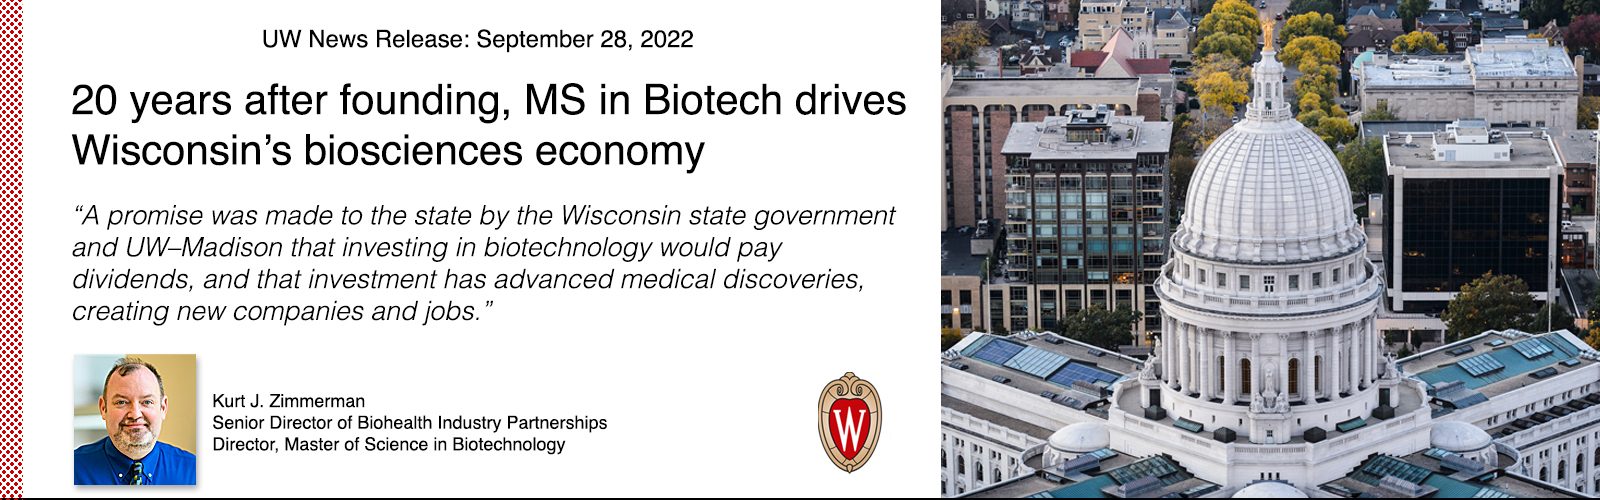 masthead titled celebrating 20 years of the MS in Biotechnology Program at UW-Madison